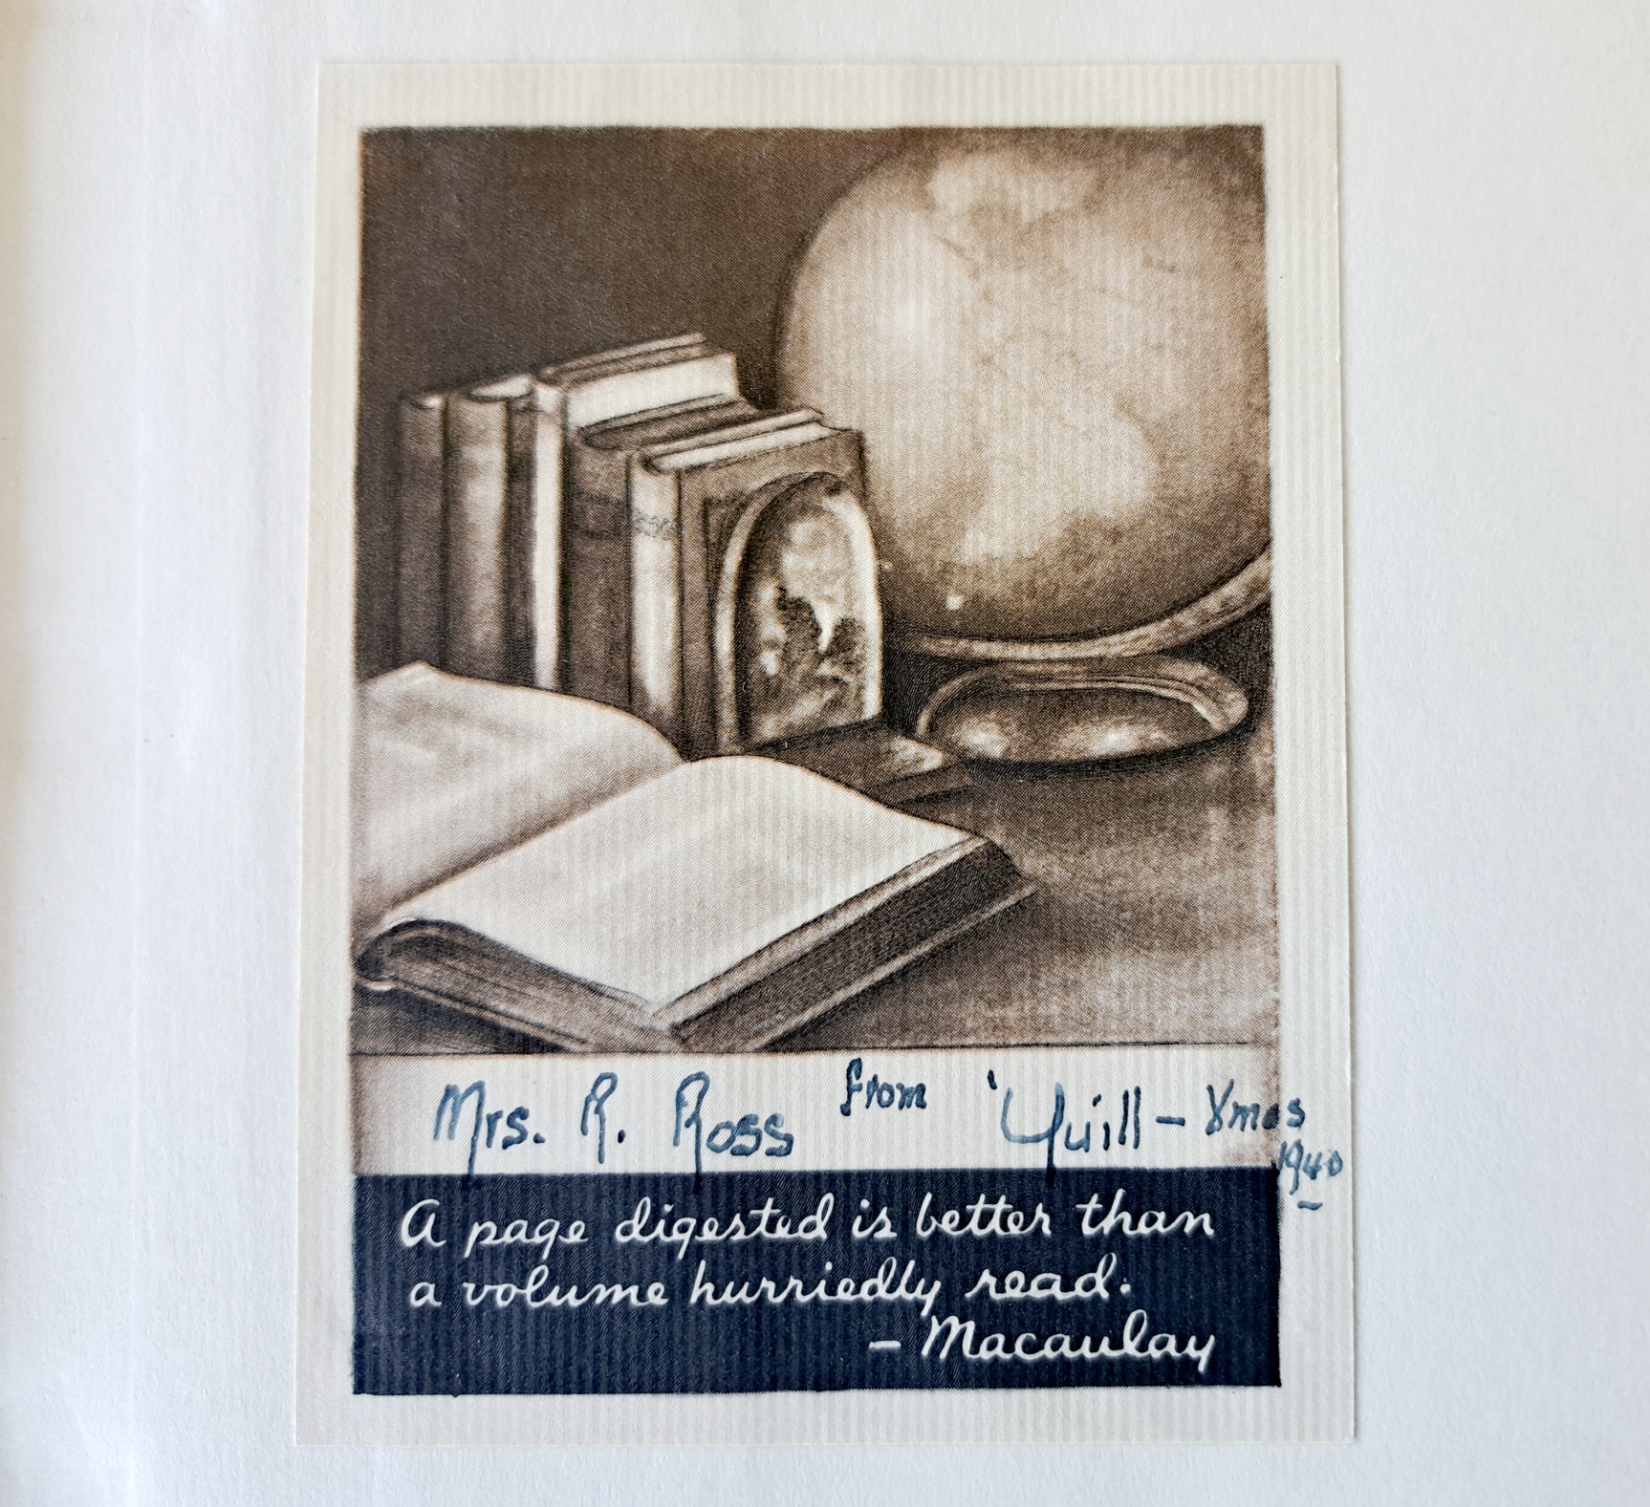 Example of a bookplate